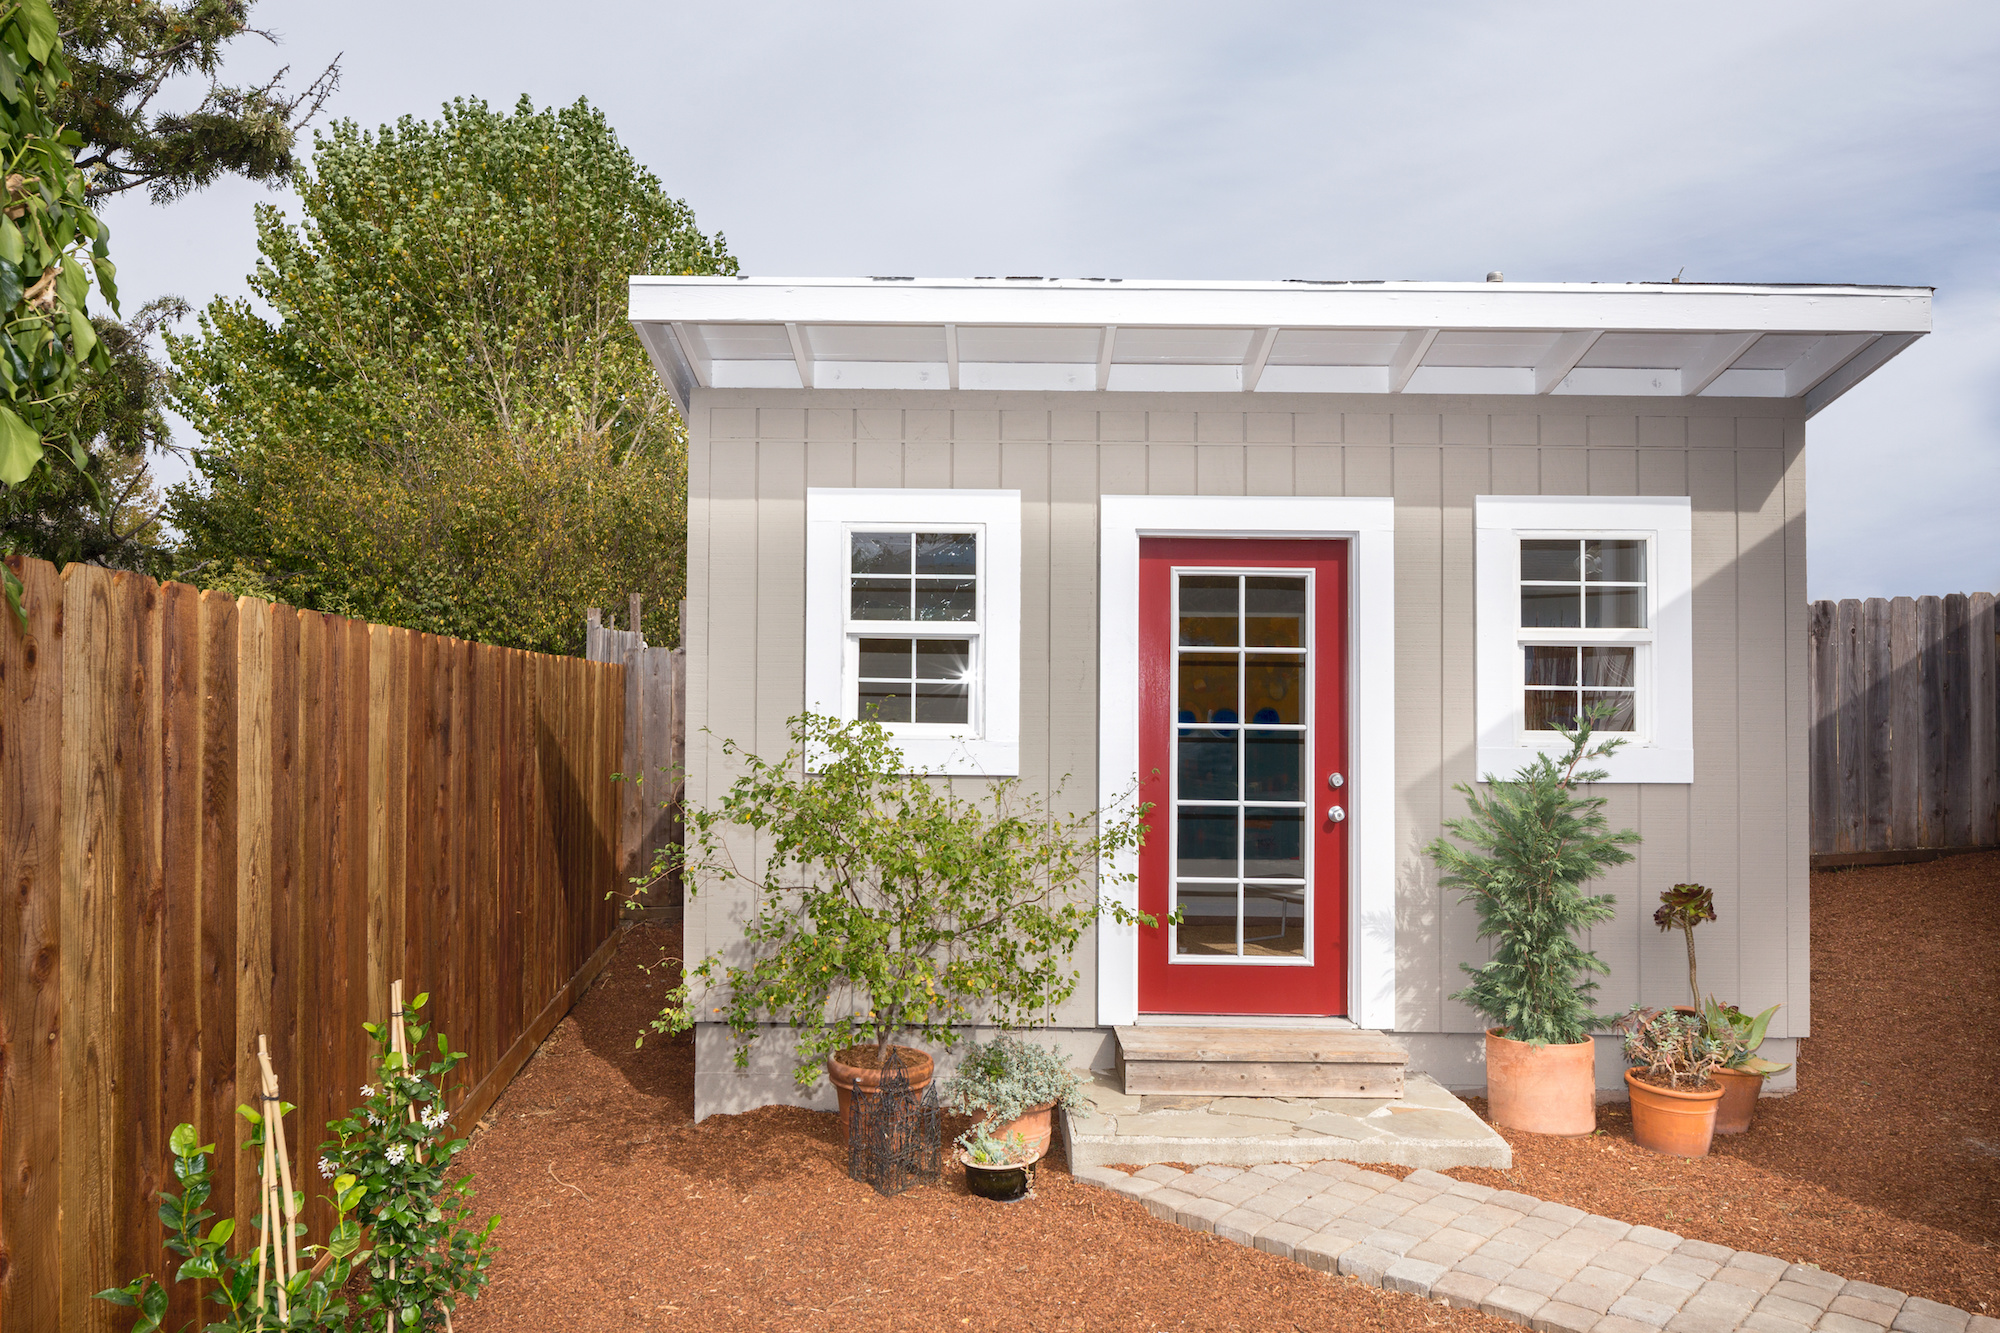 Small grey standalone bungalow with a red door and white trim.